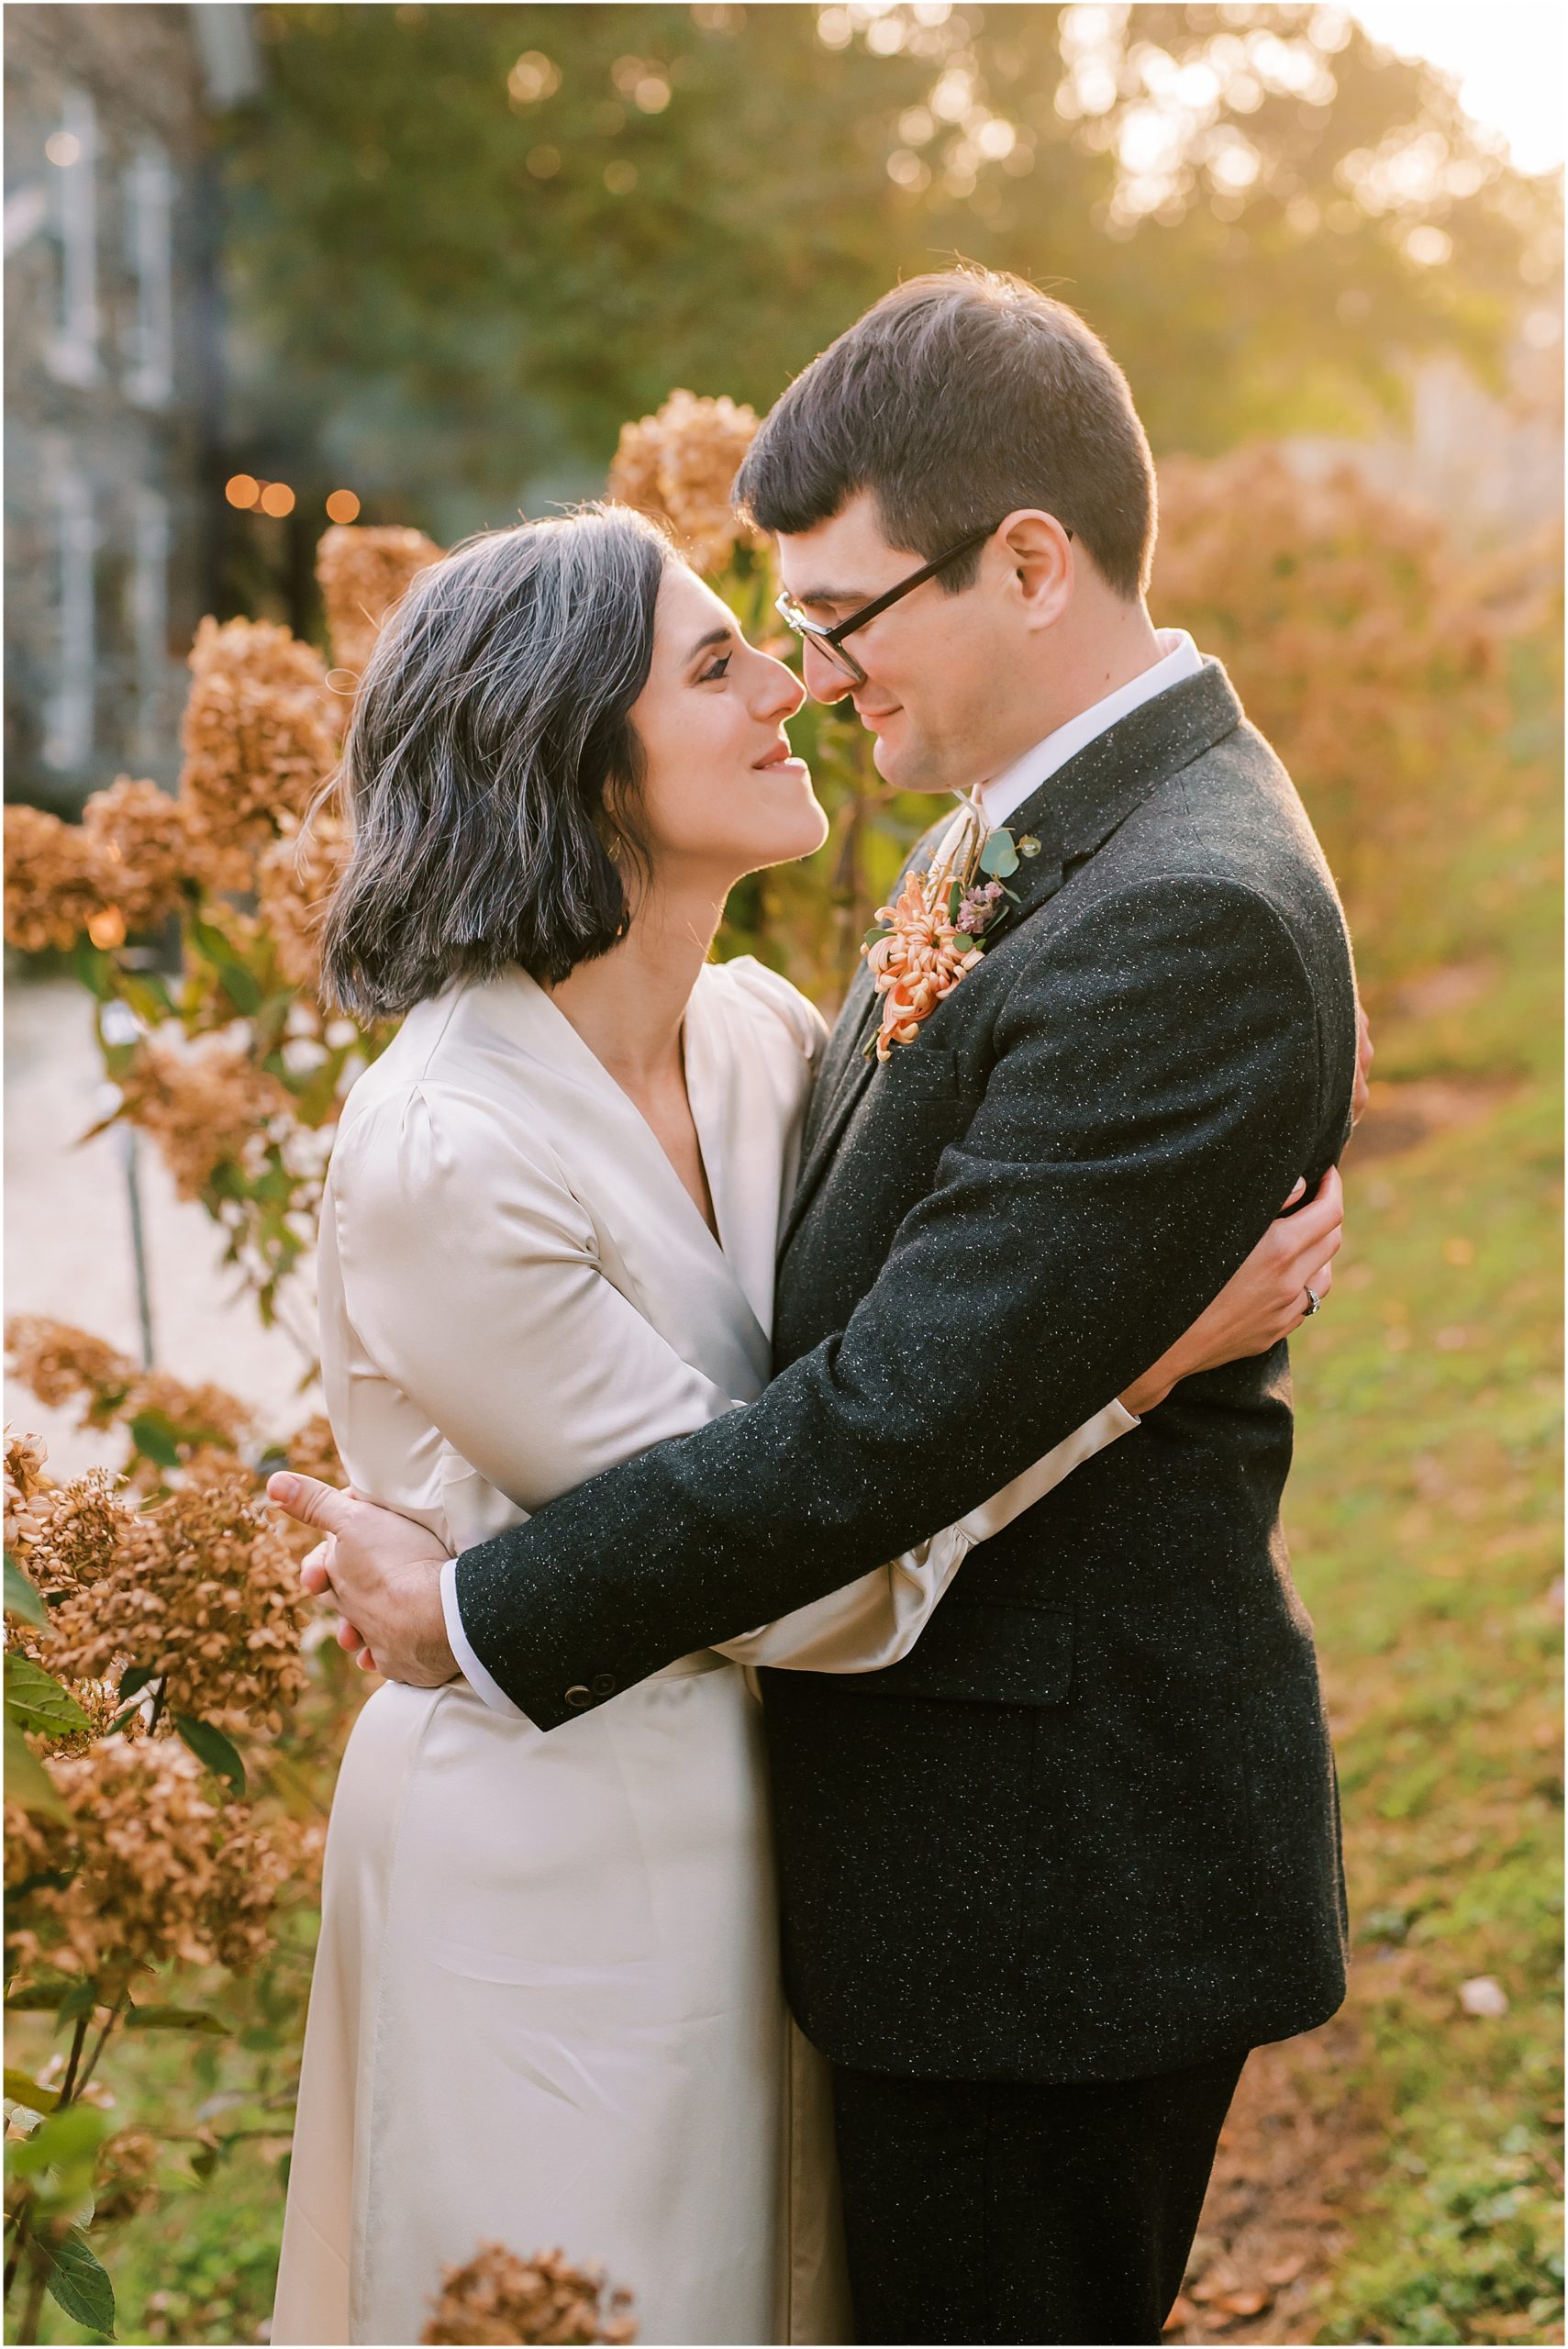 Newlyweds embracing during golden hour at Tranquility Farm